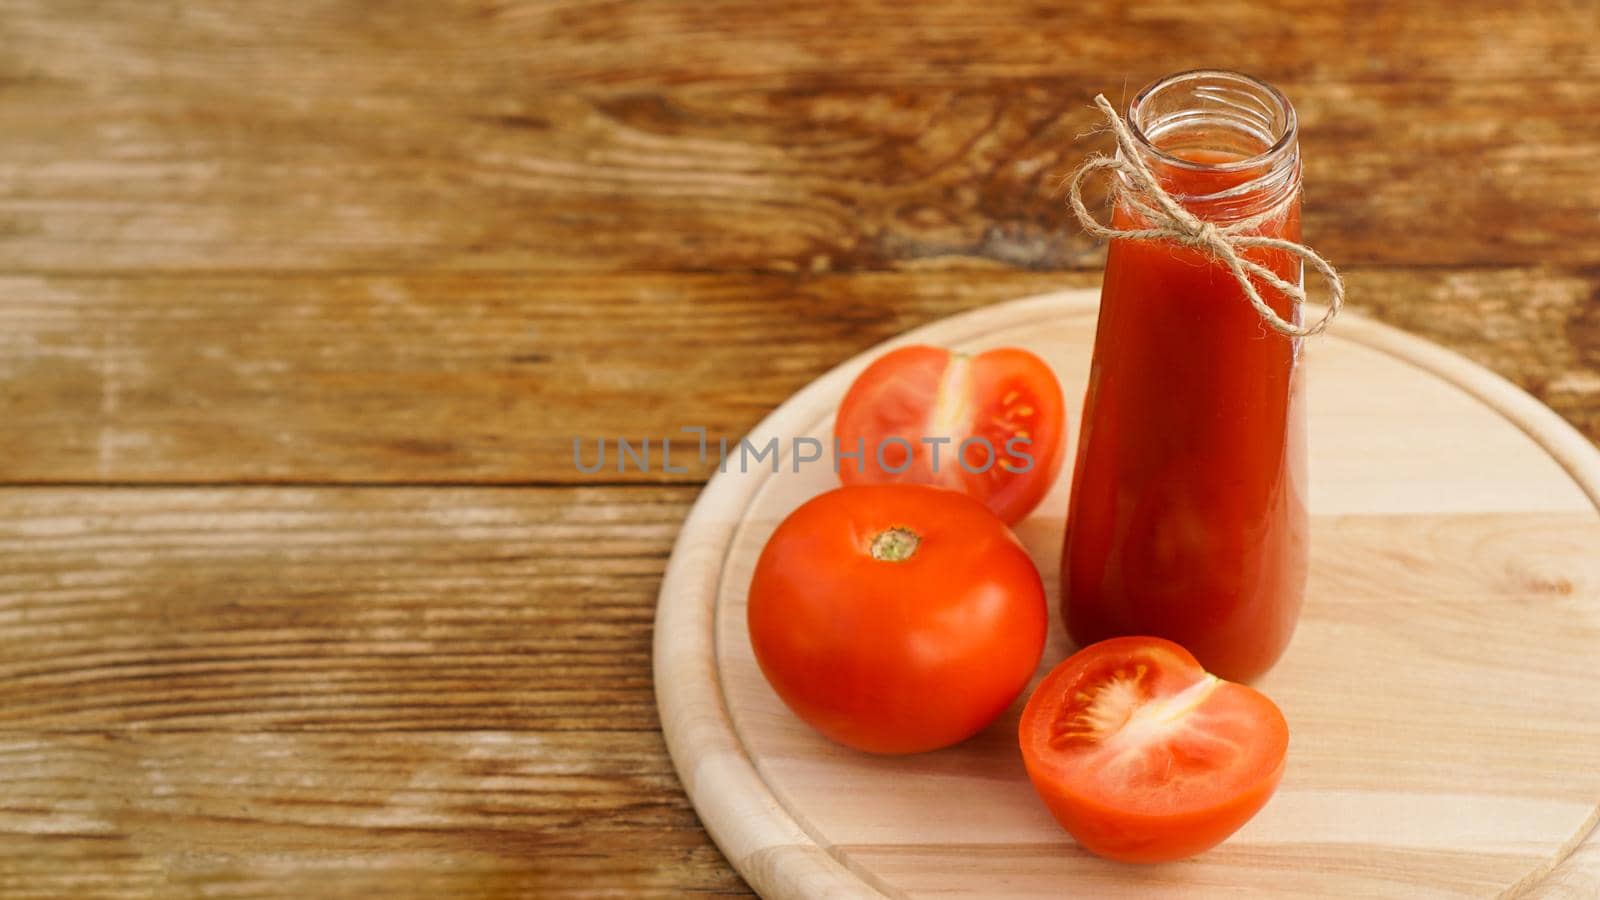 Tomato juice, fresh tomatoes on wooden background horizontal by natali_brill